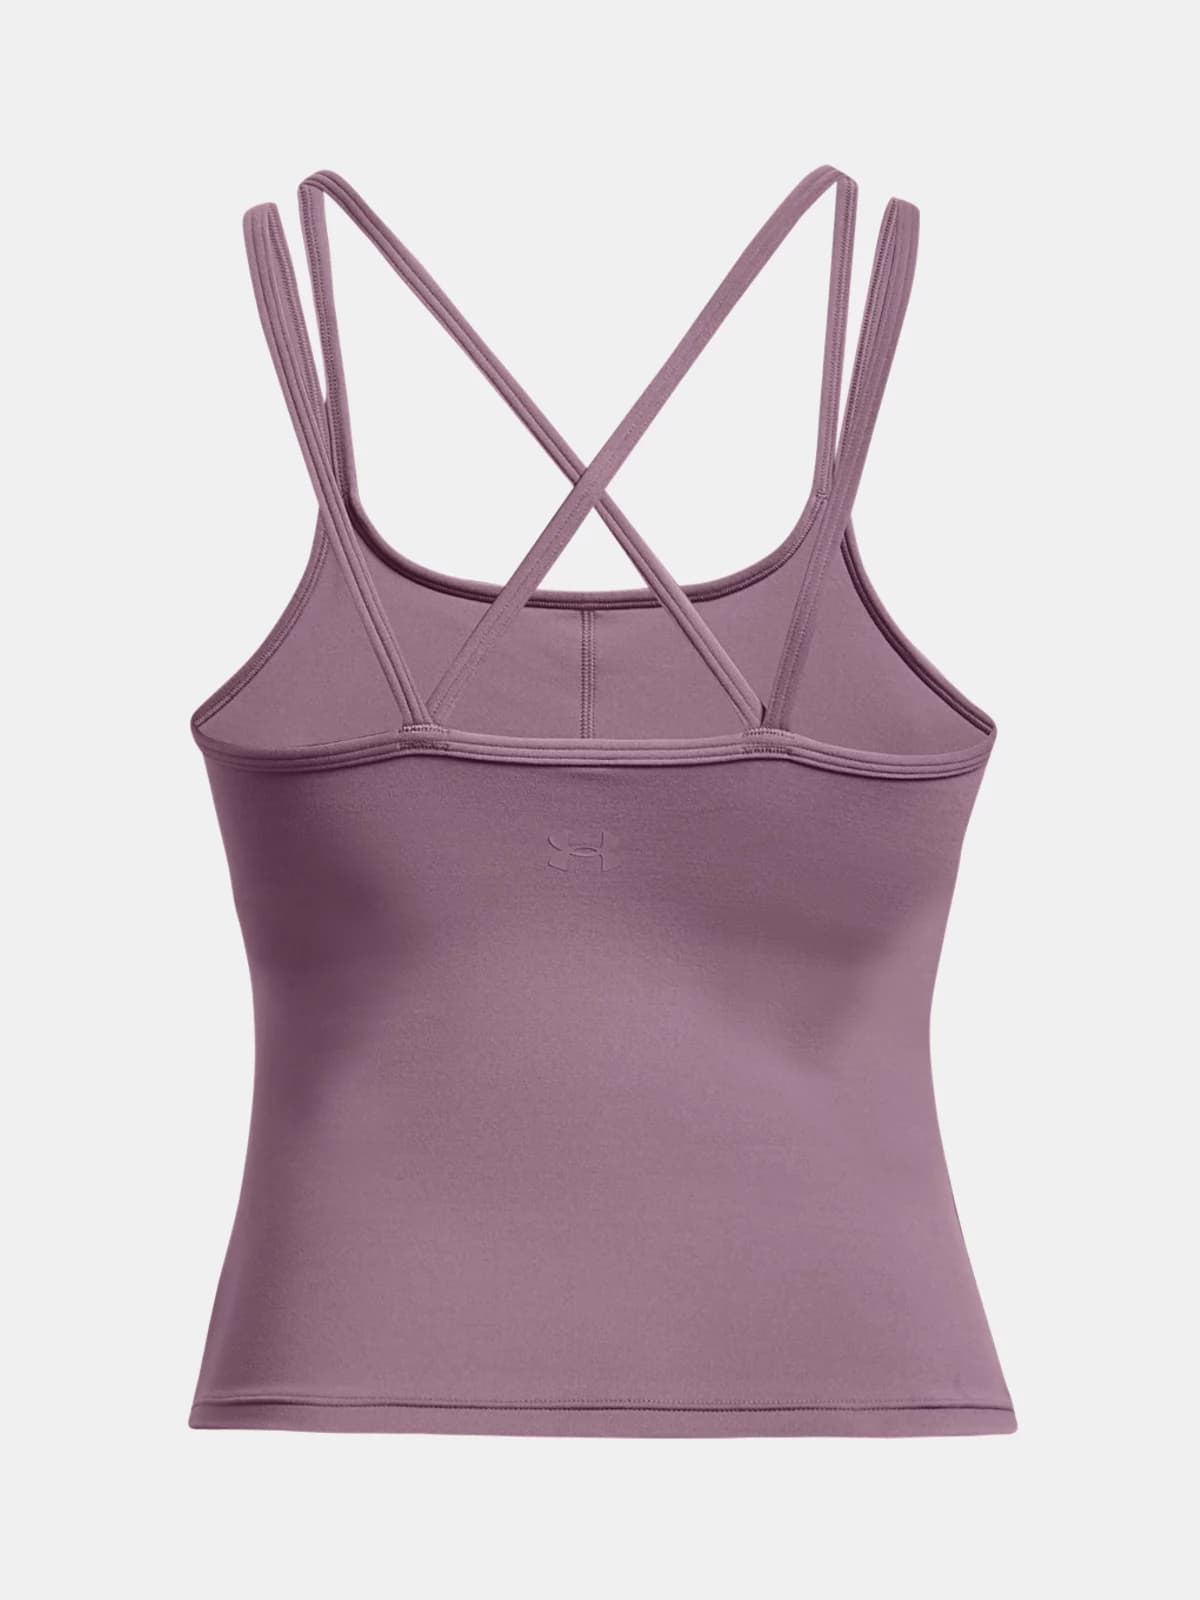 Under Armour Meridian Fitted Tank Spor Atlet 1379154-500 6